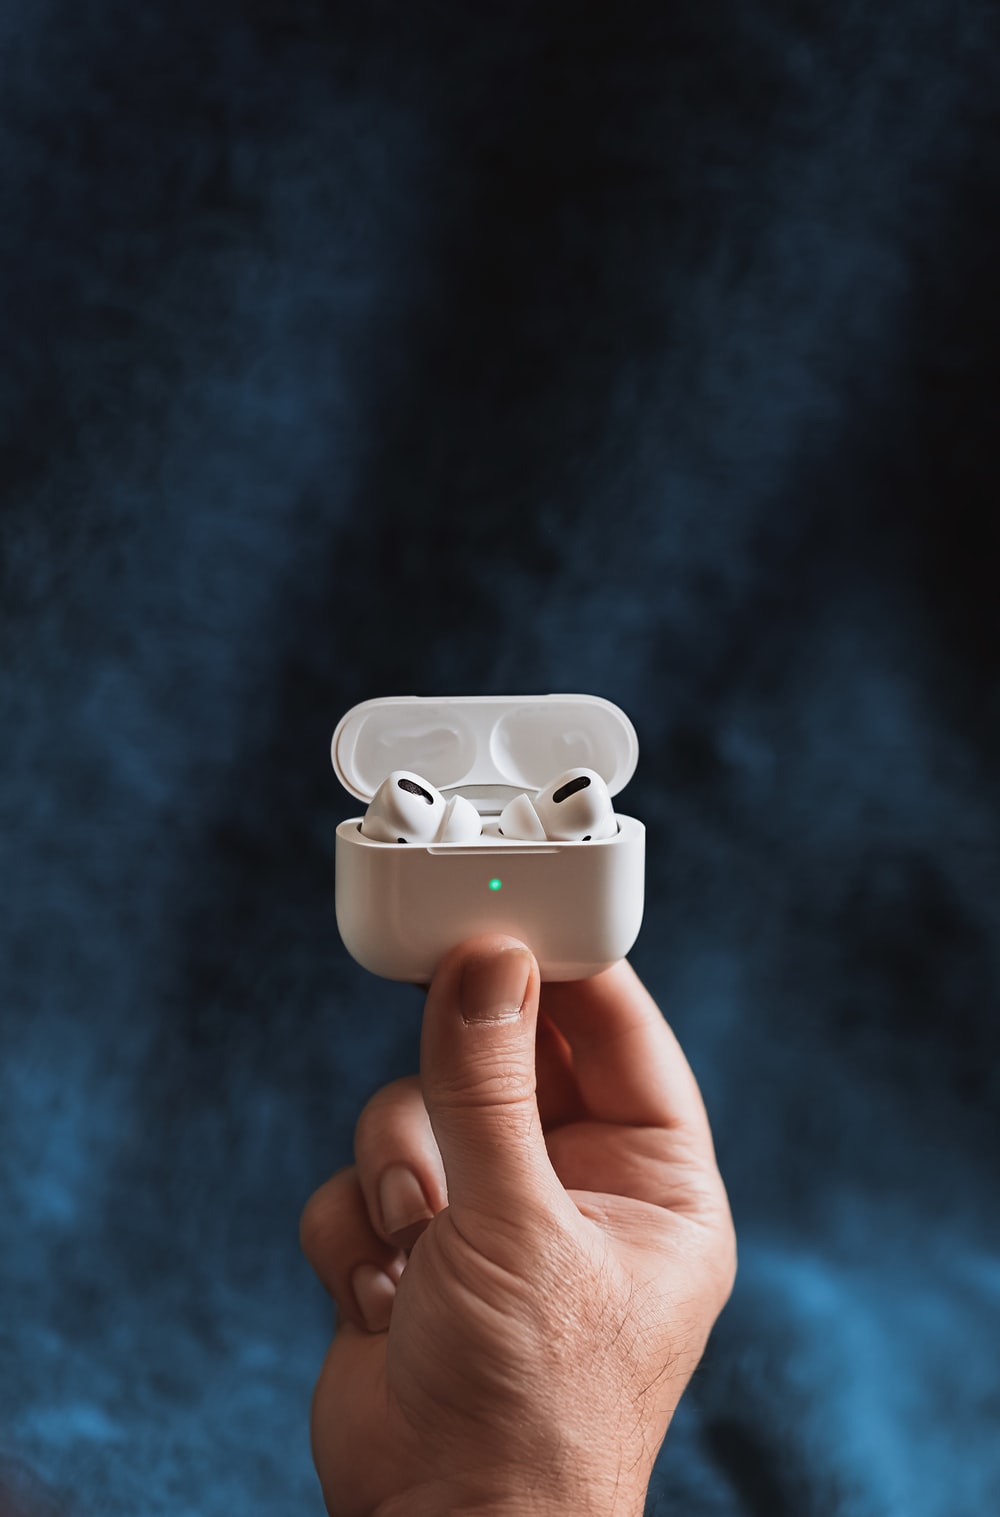 Apple Airpods Picture. Download Free Image